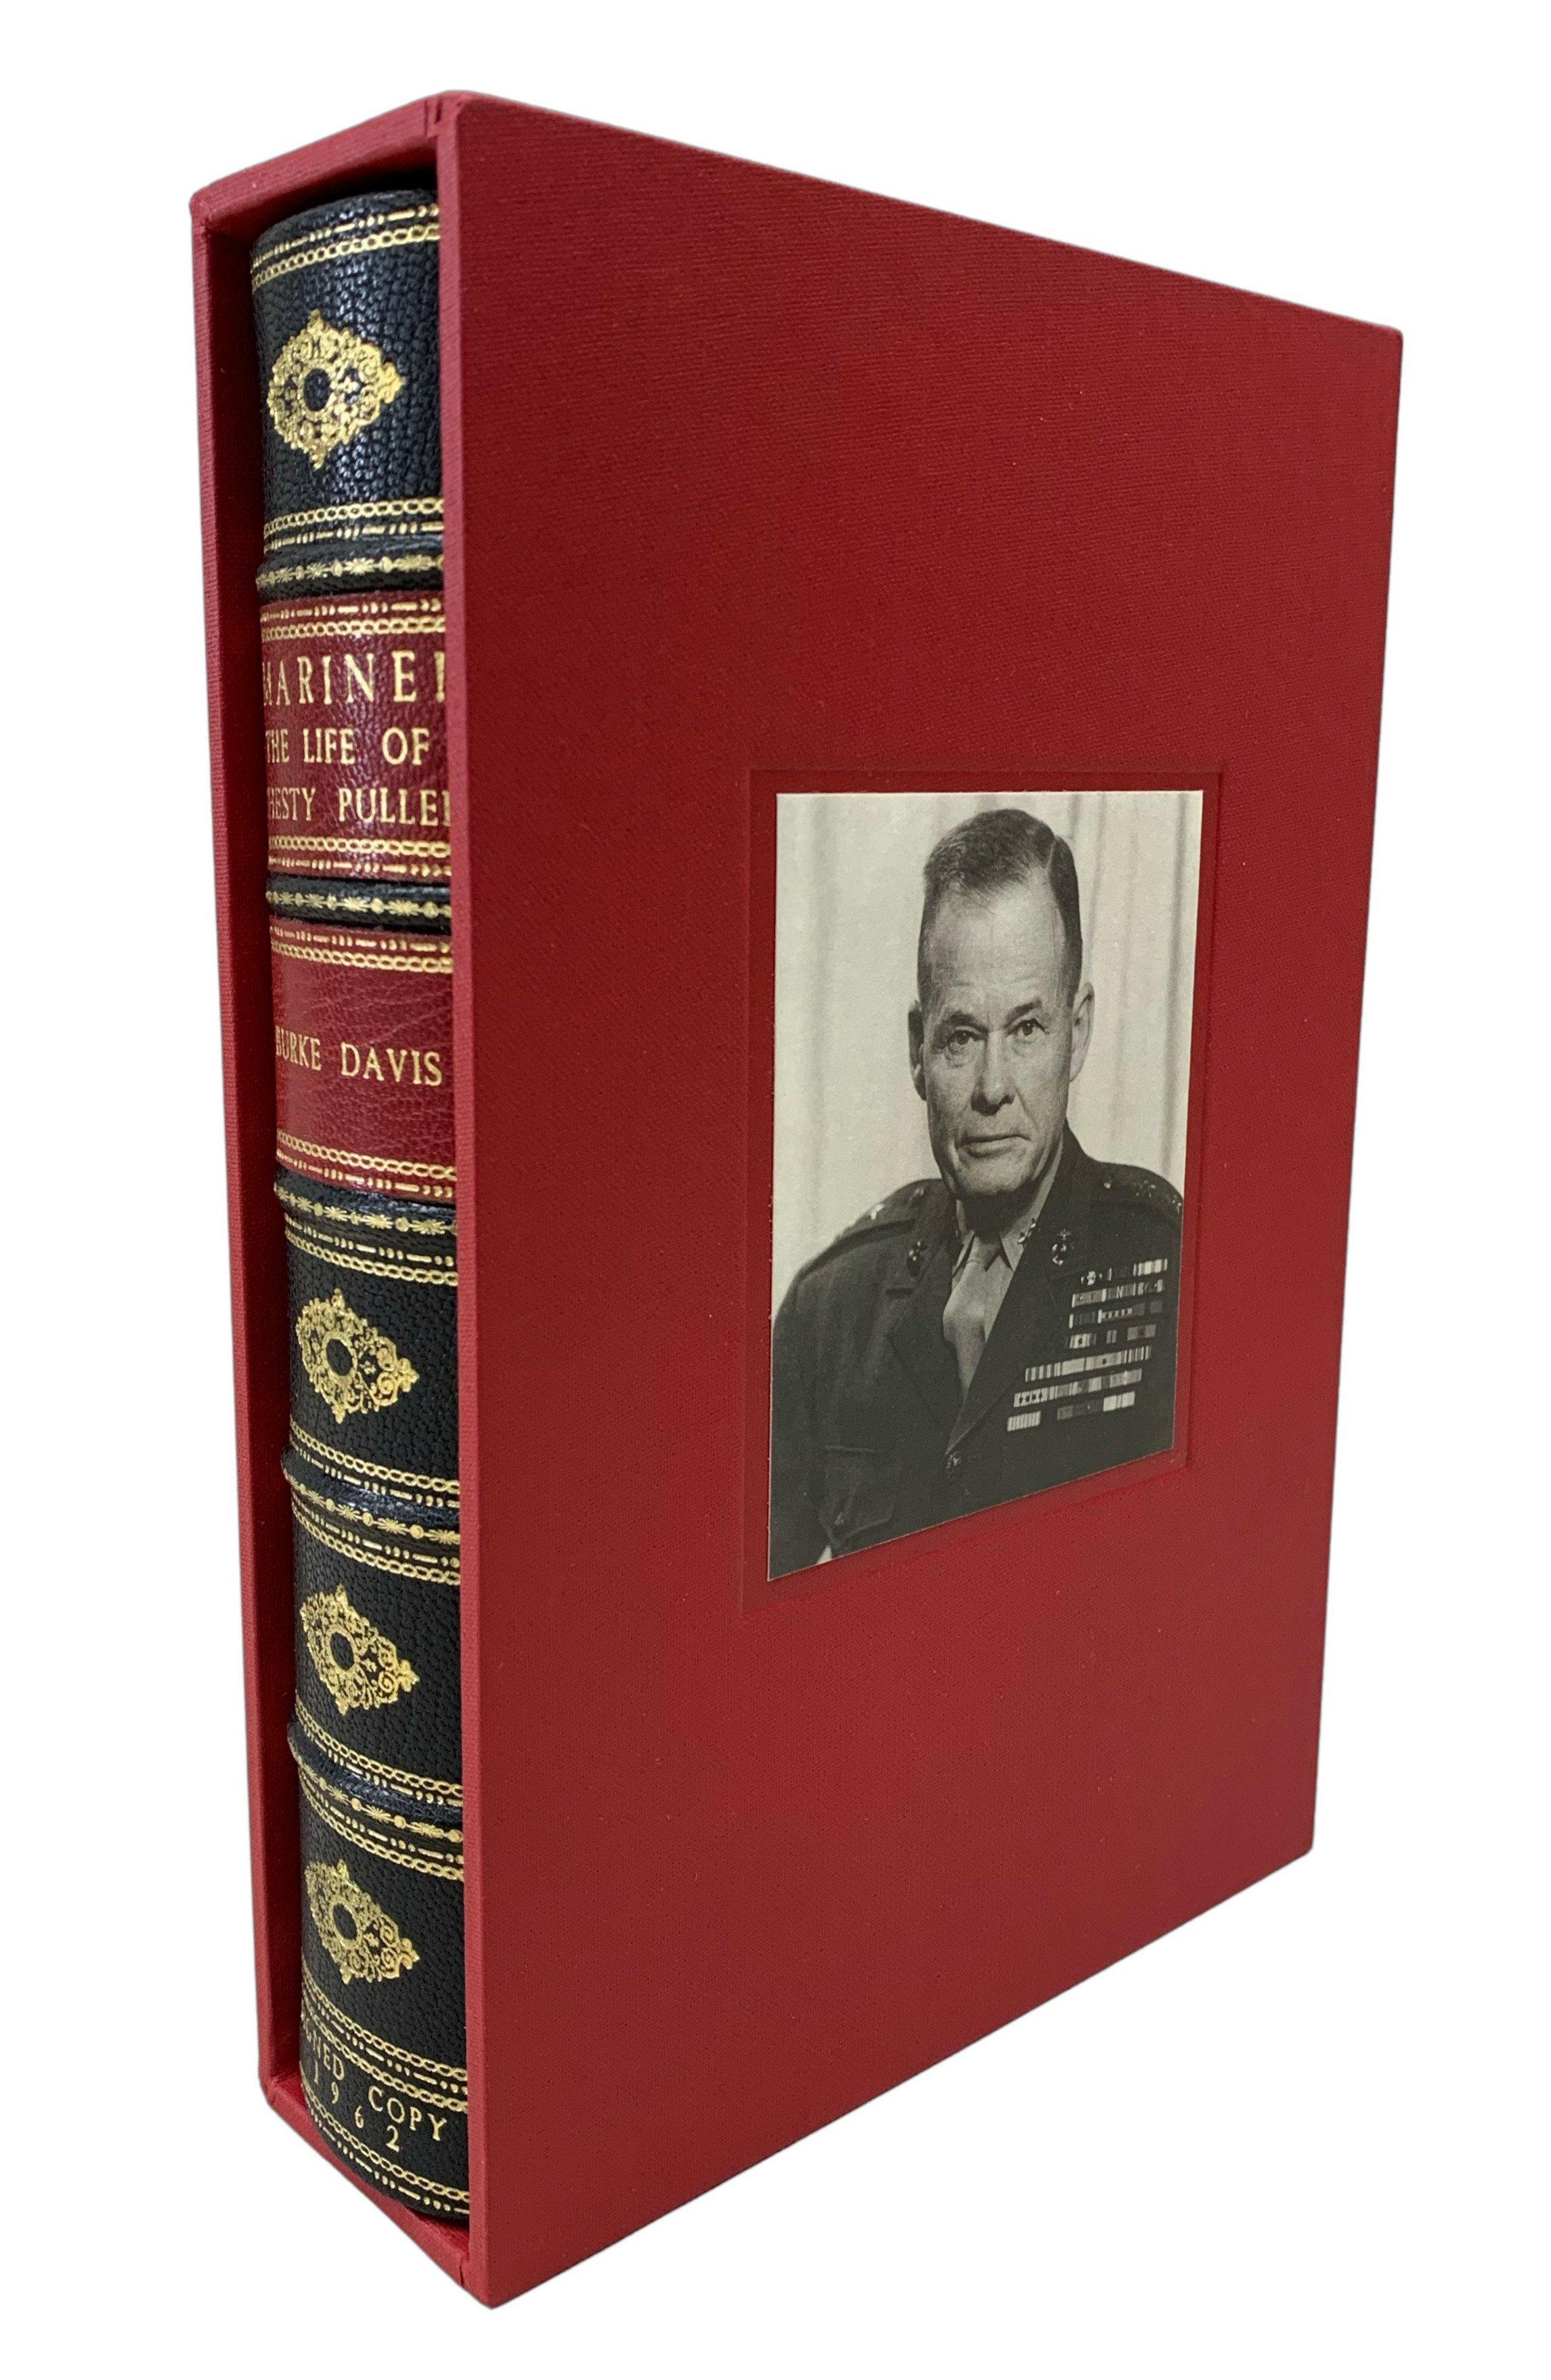 Marine! The Life of Chesty Puller by Burke Davis, Signed by Chesty Puller, 1962 1